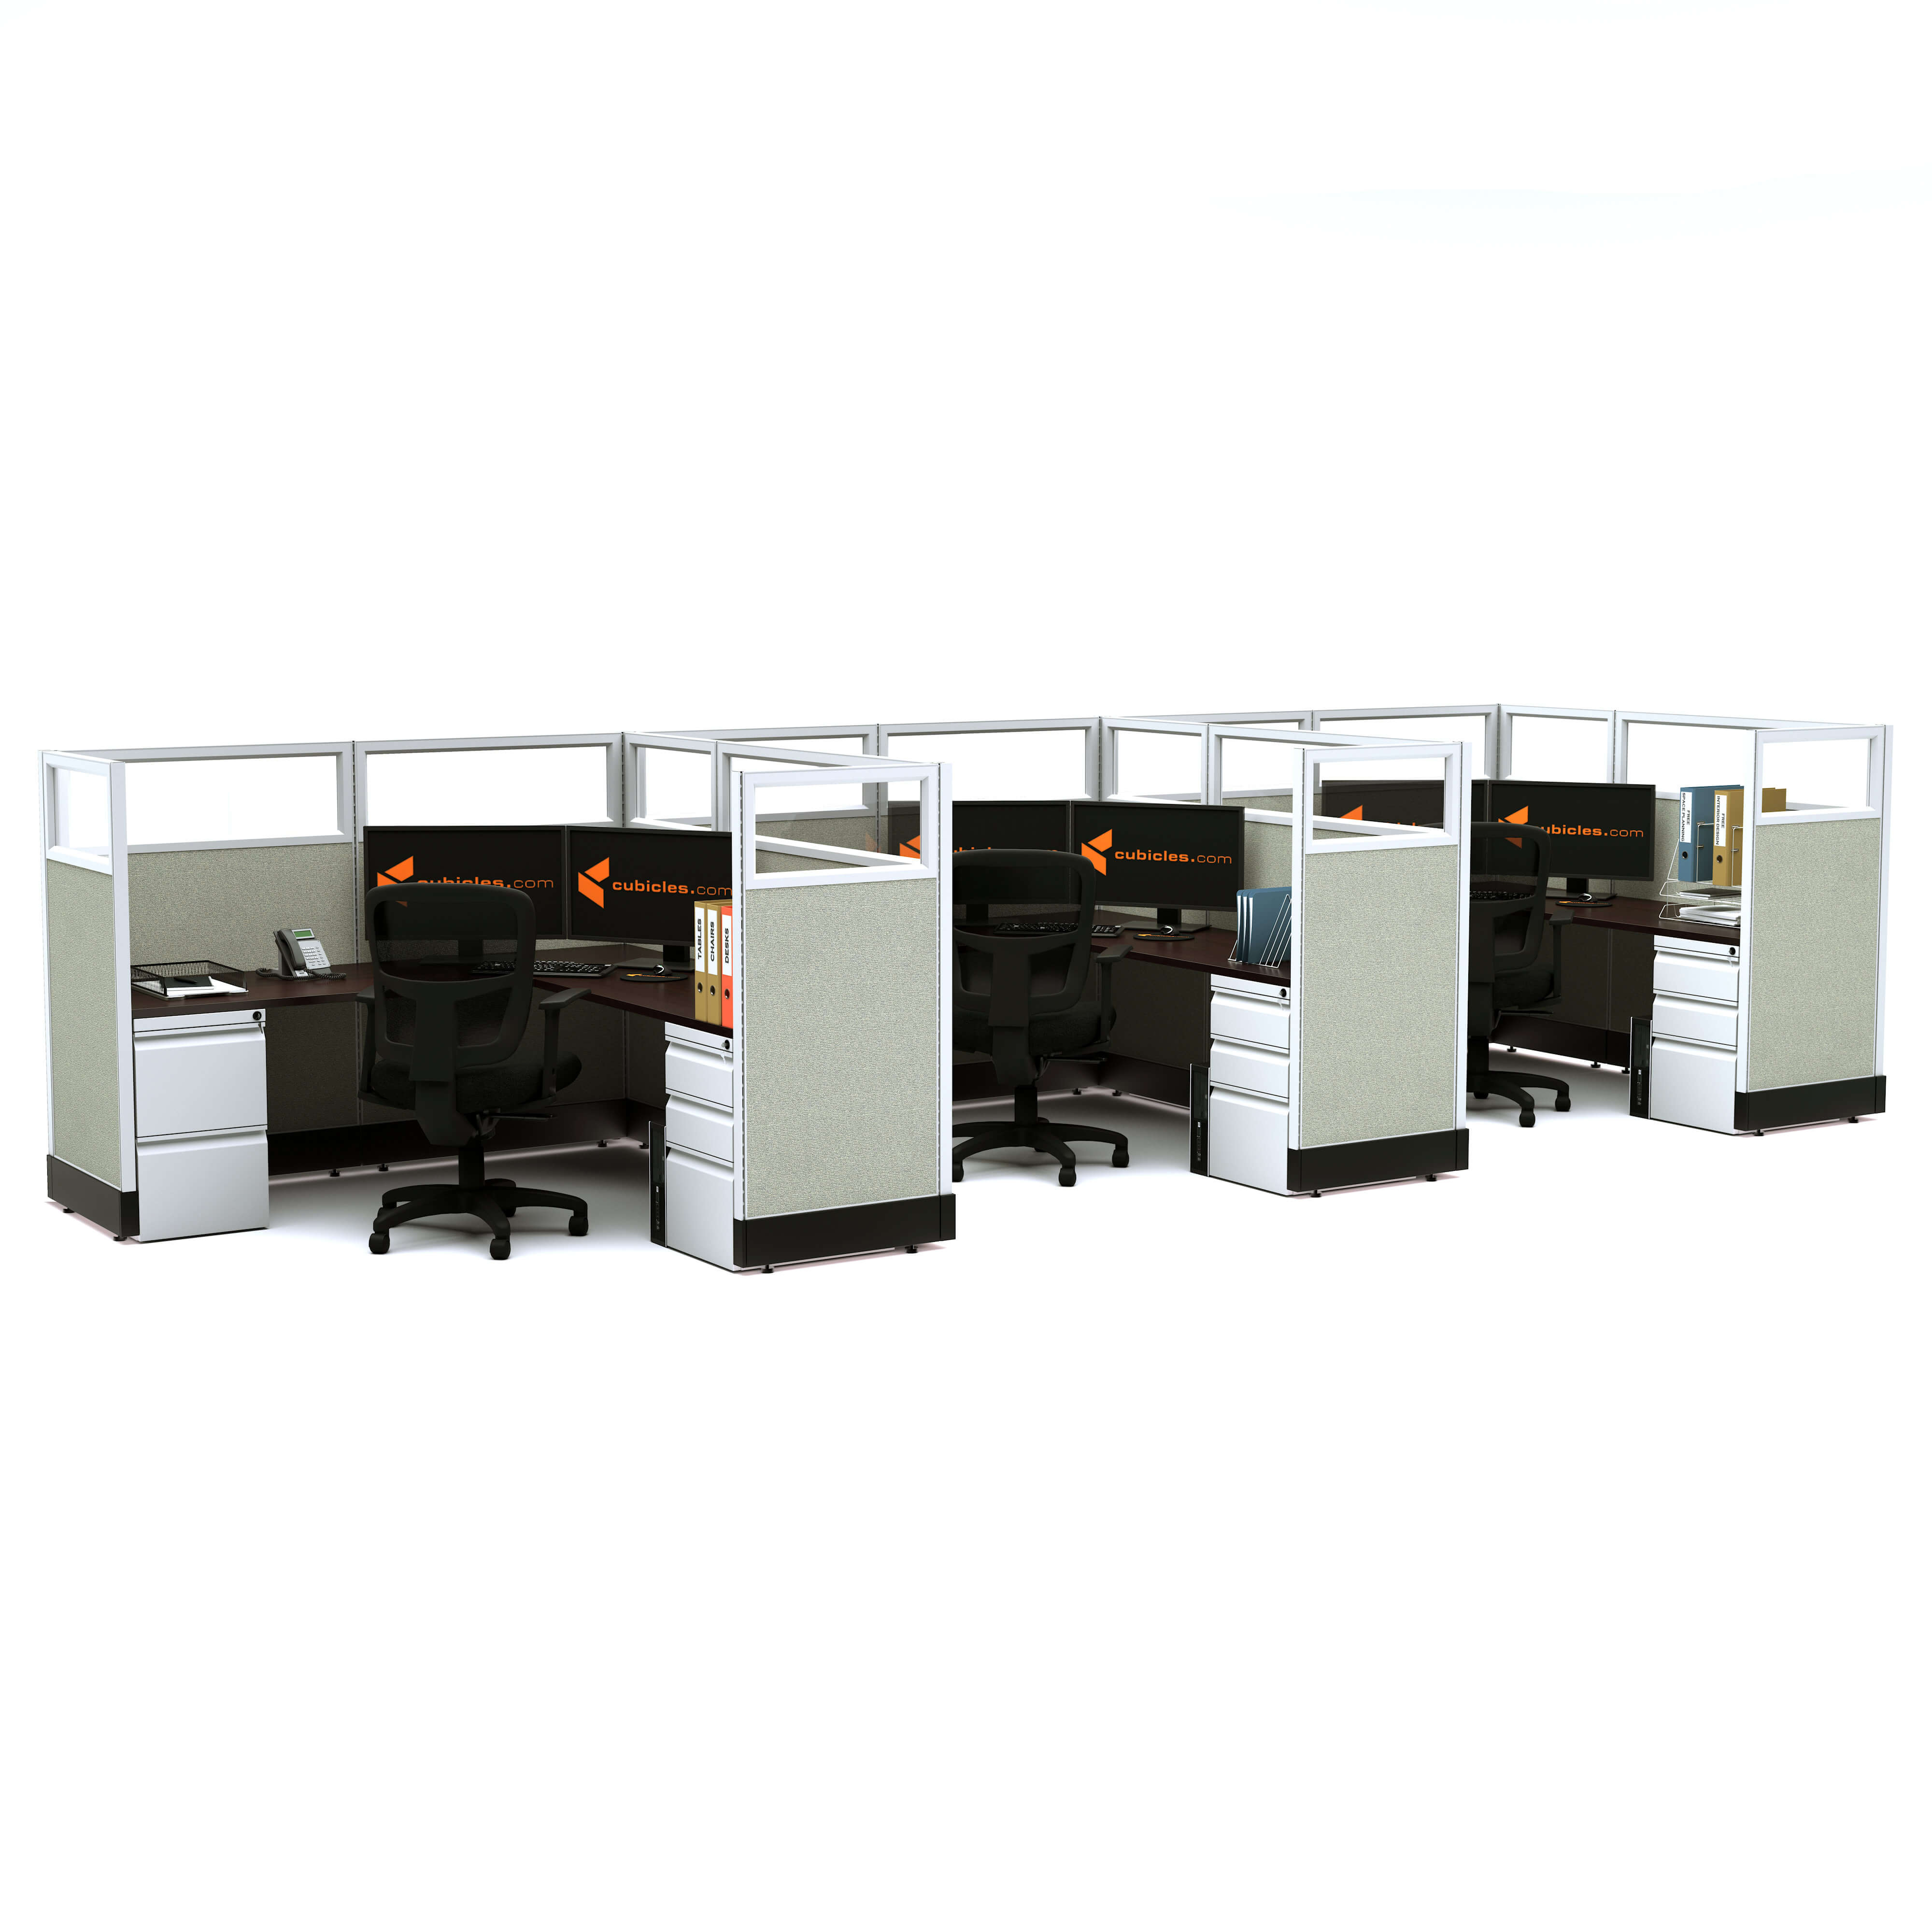 modular-office-furniture-glass-office-cubicles-53h-3pack-inline-powered.jpg